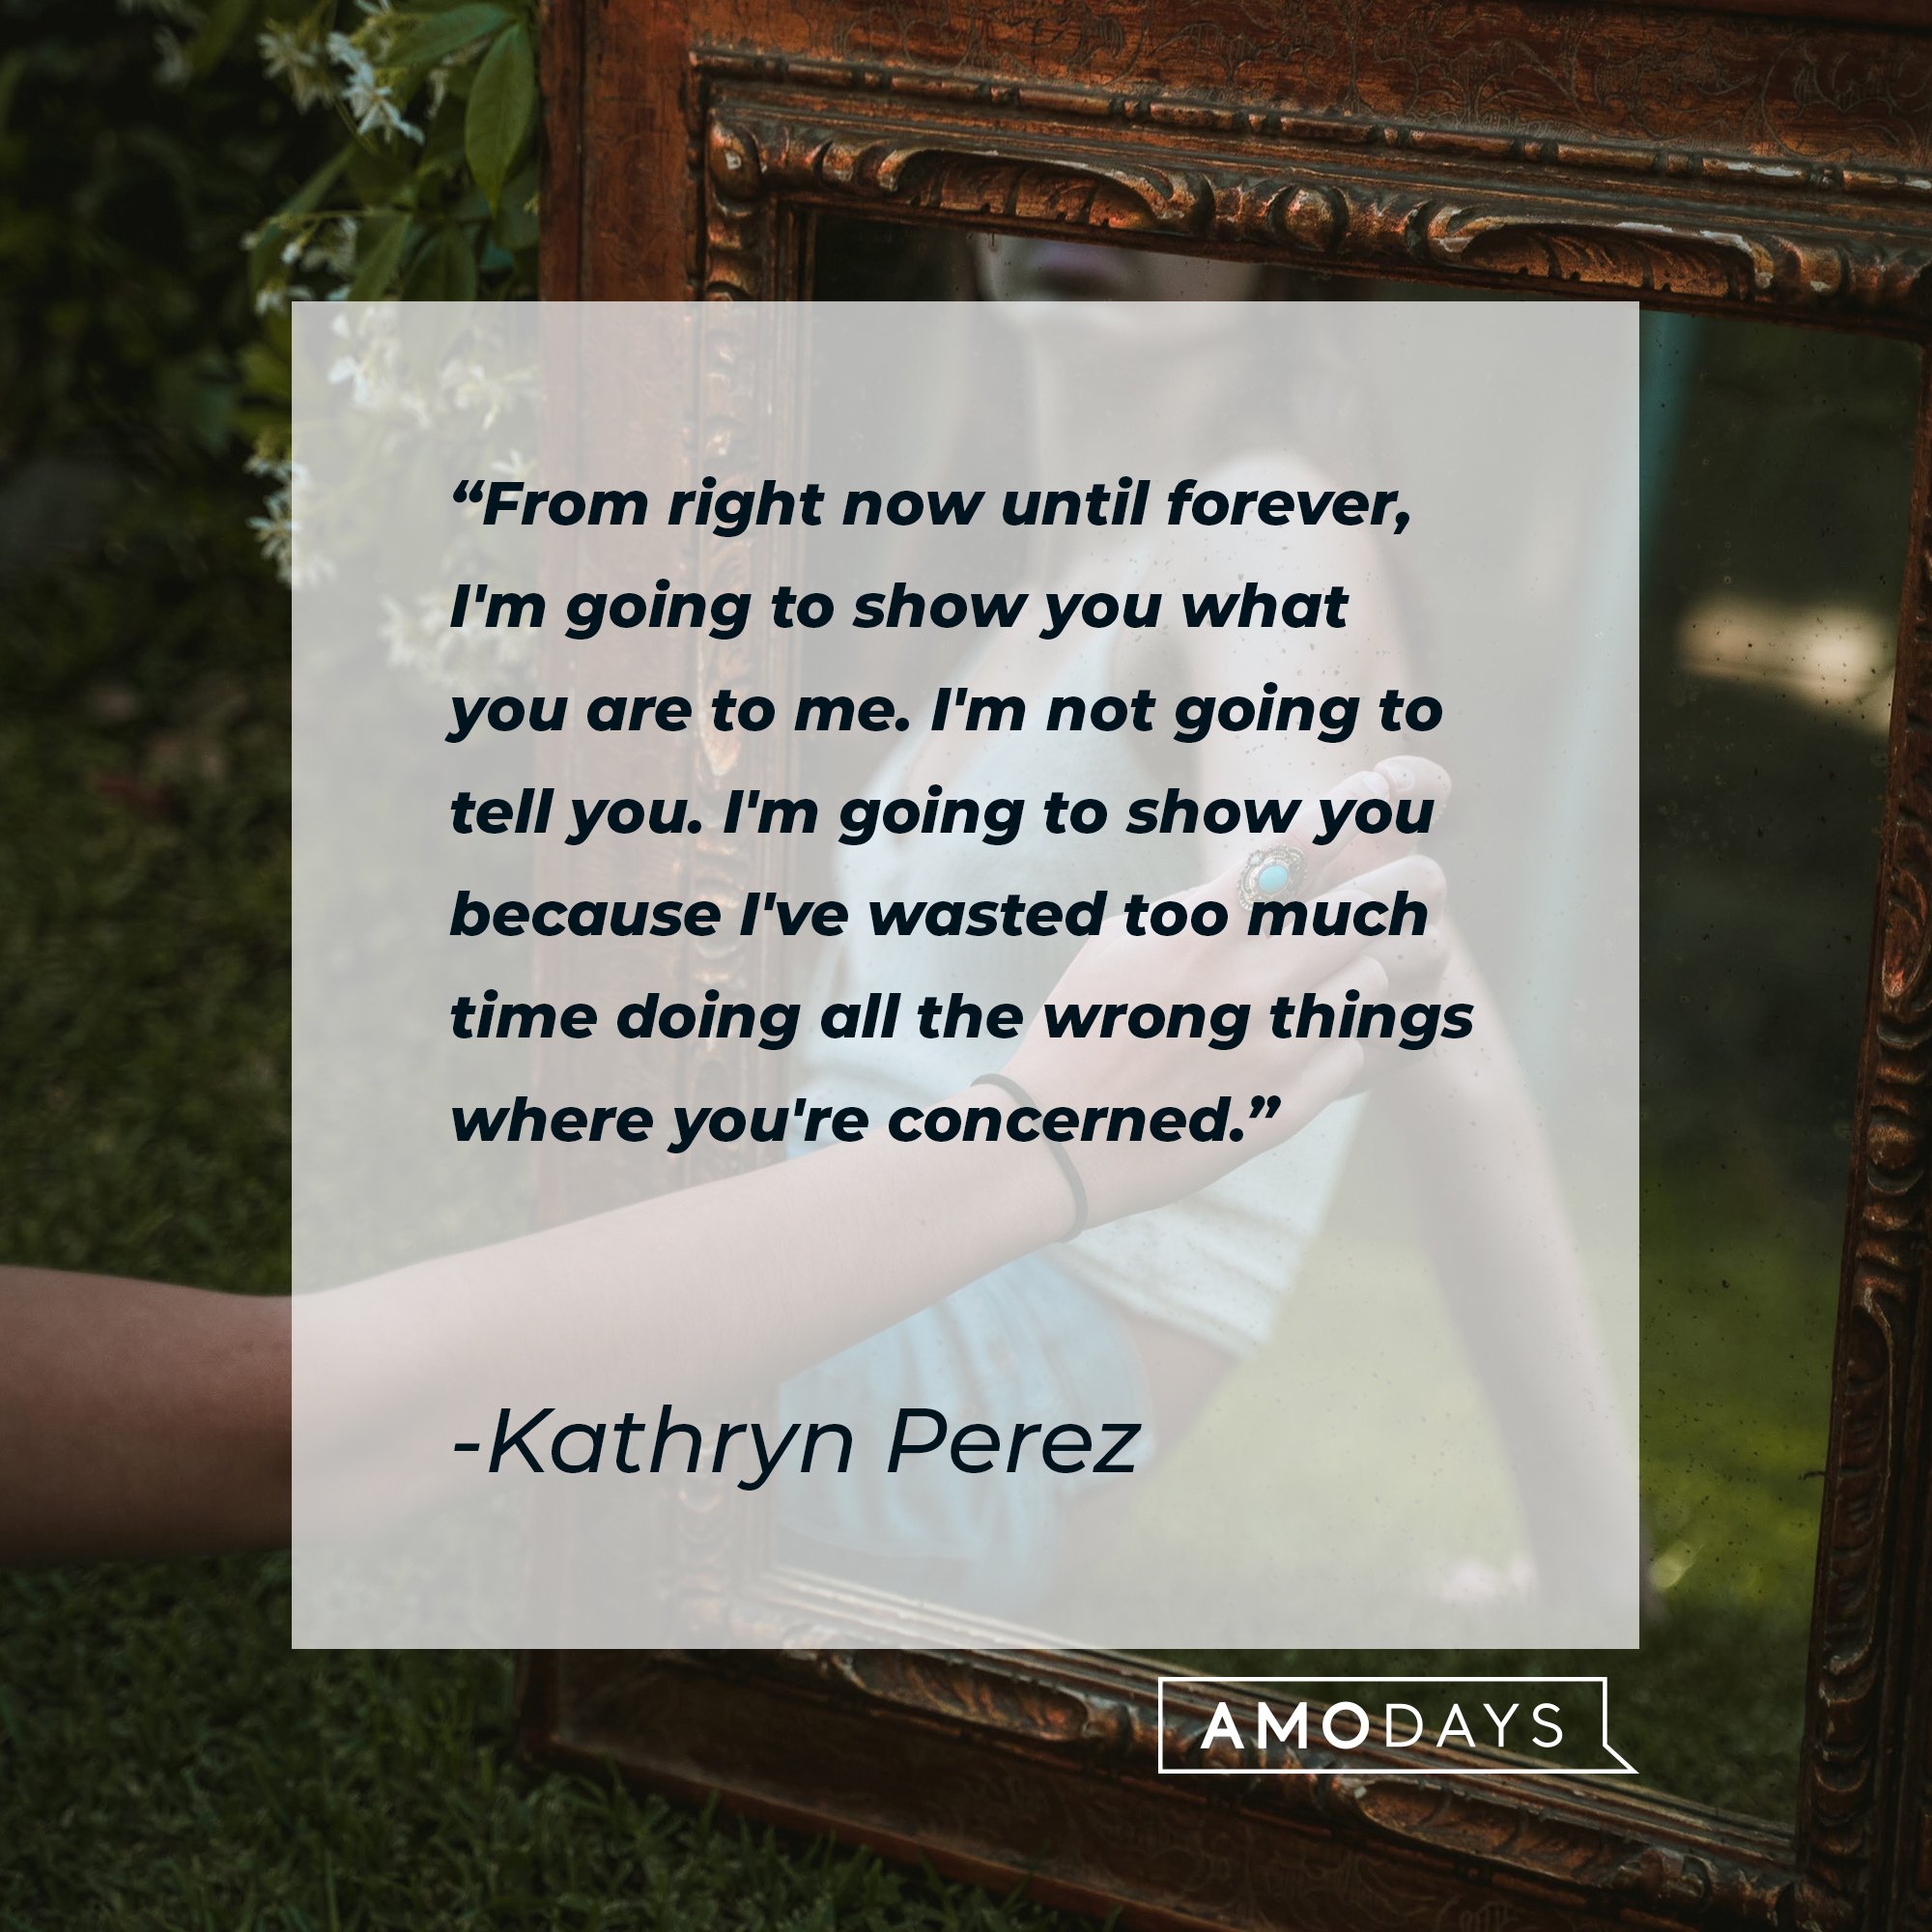 Kathryn Perez’ quote: "From right now until forever, I'm going to show you what you are to me. I'm not going to tell you. I'm going to show you because I've wasted too much time doing all the wrong things where you're concerned." | Image: AmoDays